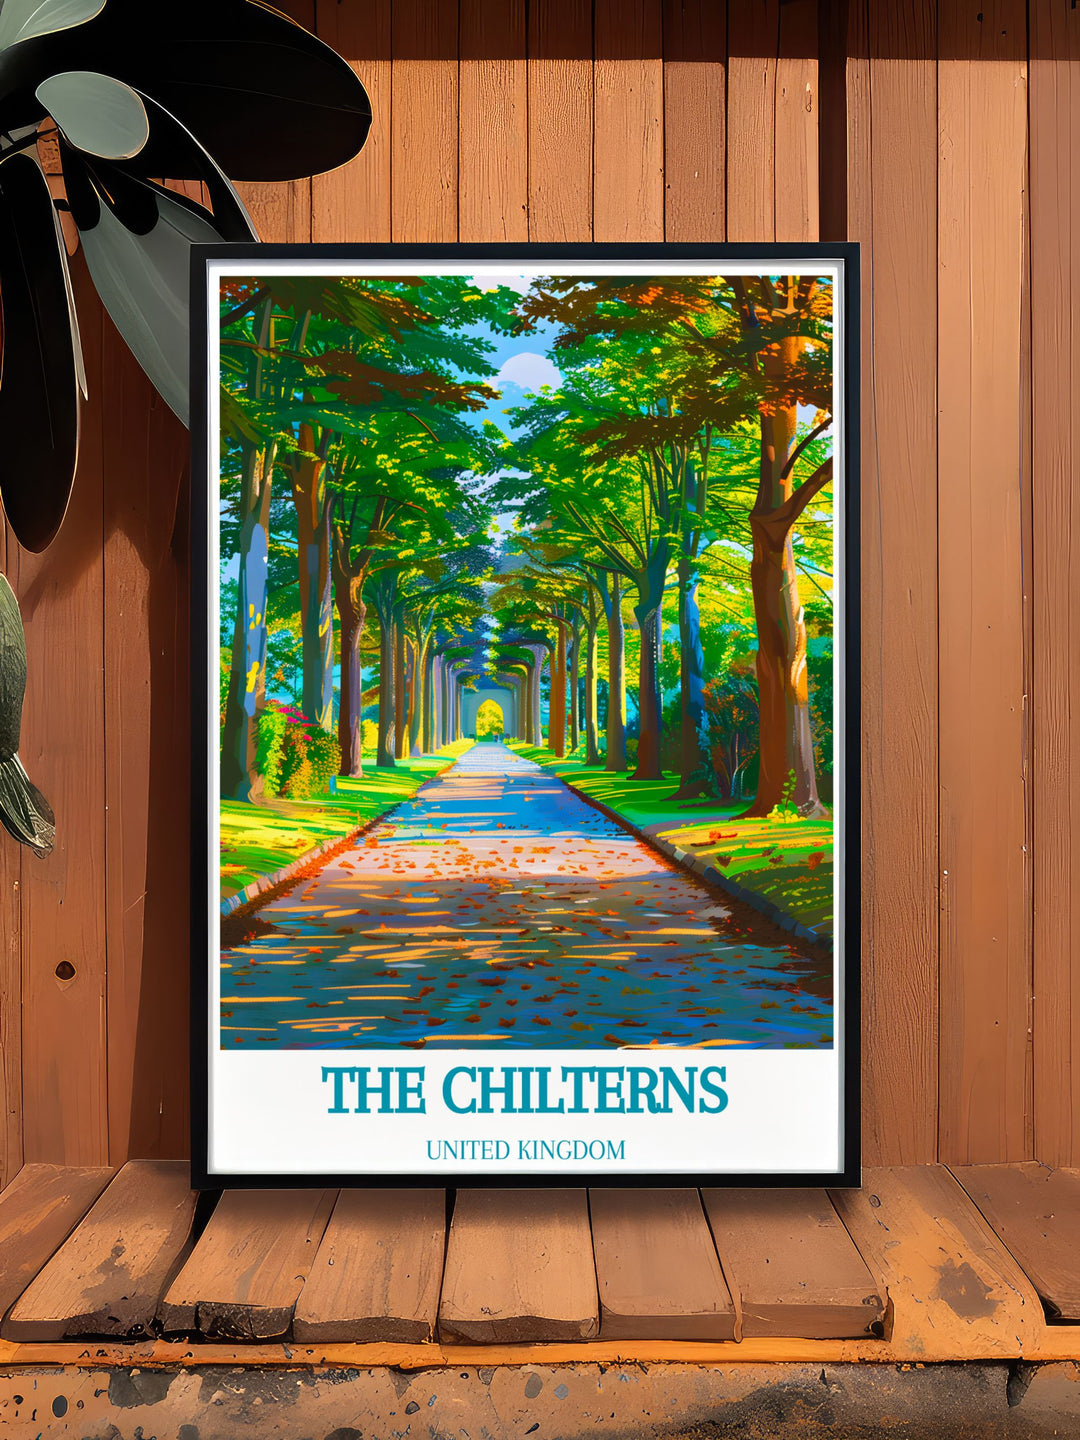 United Kingdom Posters celebrating the rich natural and historical heritage of The Chilterns with vintage inspired designs, perfect for adding a touch of classic British charm to your decor.